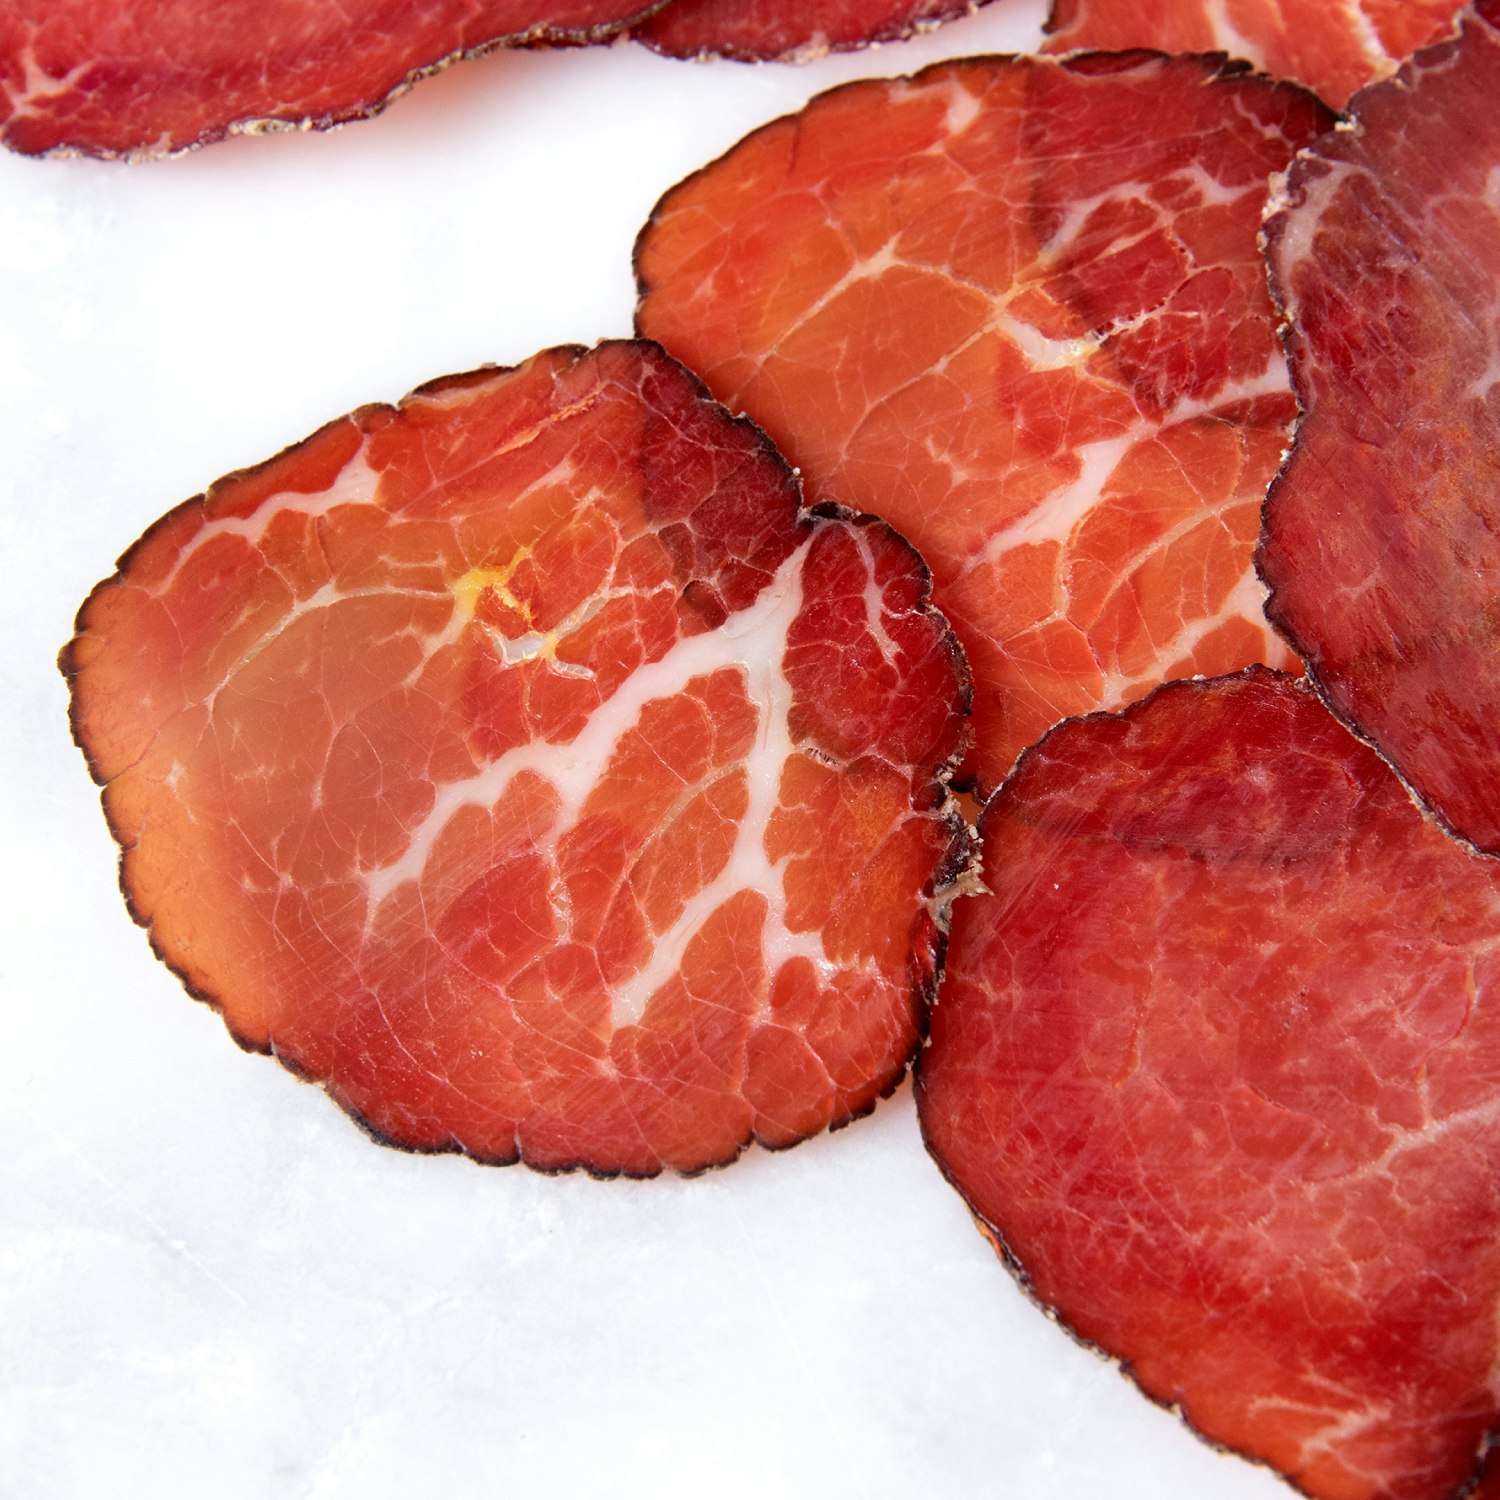 the spotted trotter sliced bresaola meats